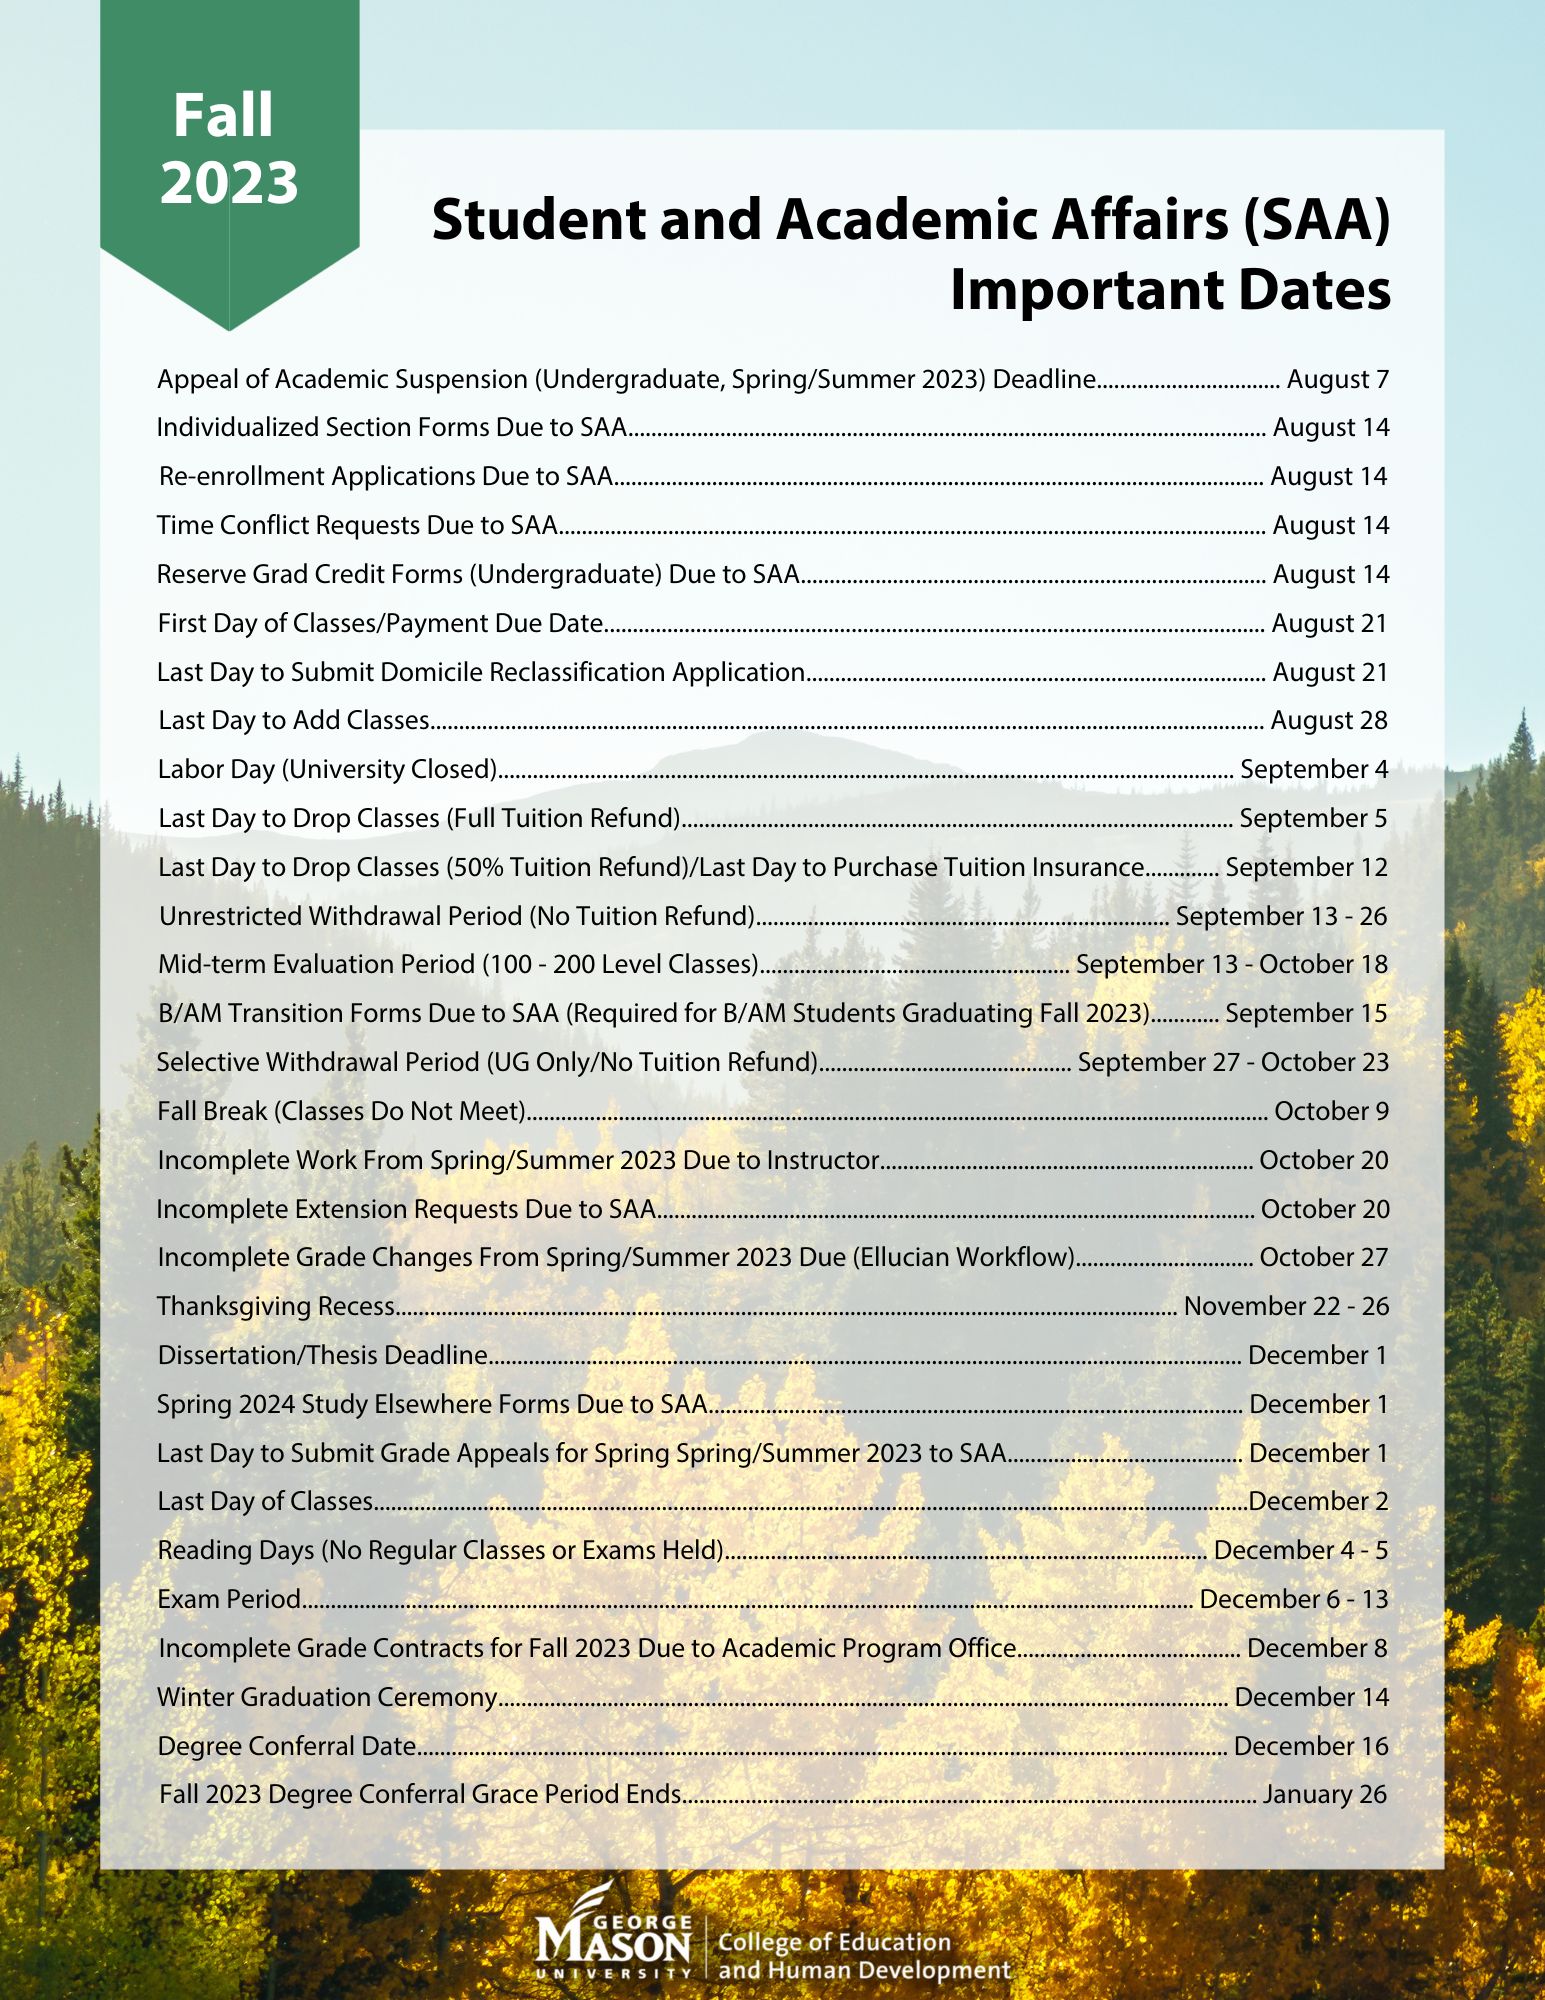 Important dates for Fall 2023 (pdf)